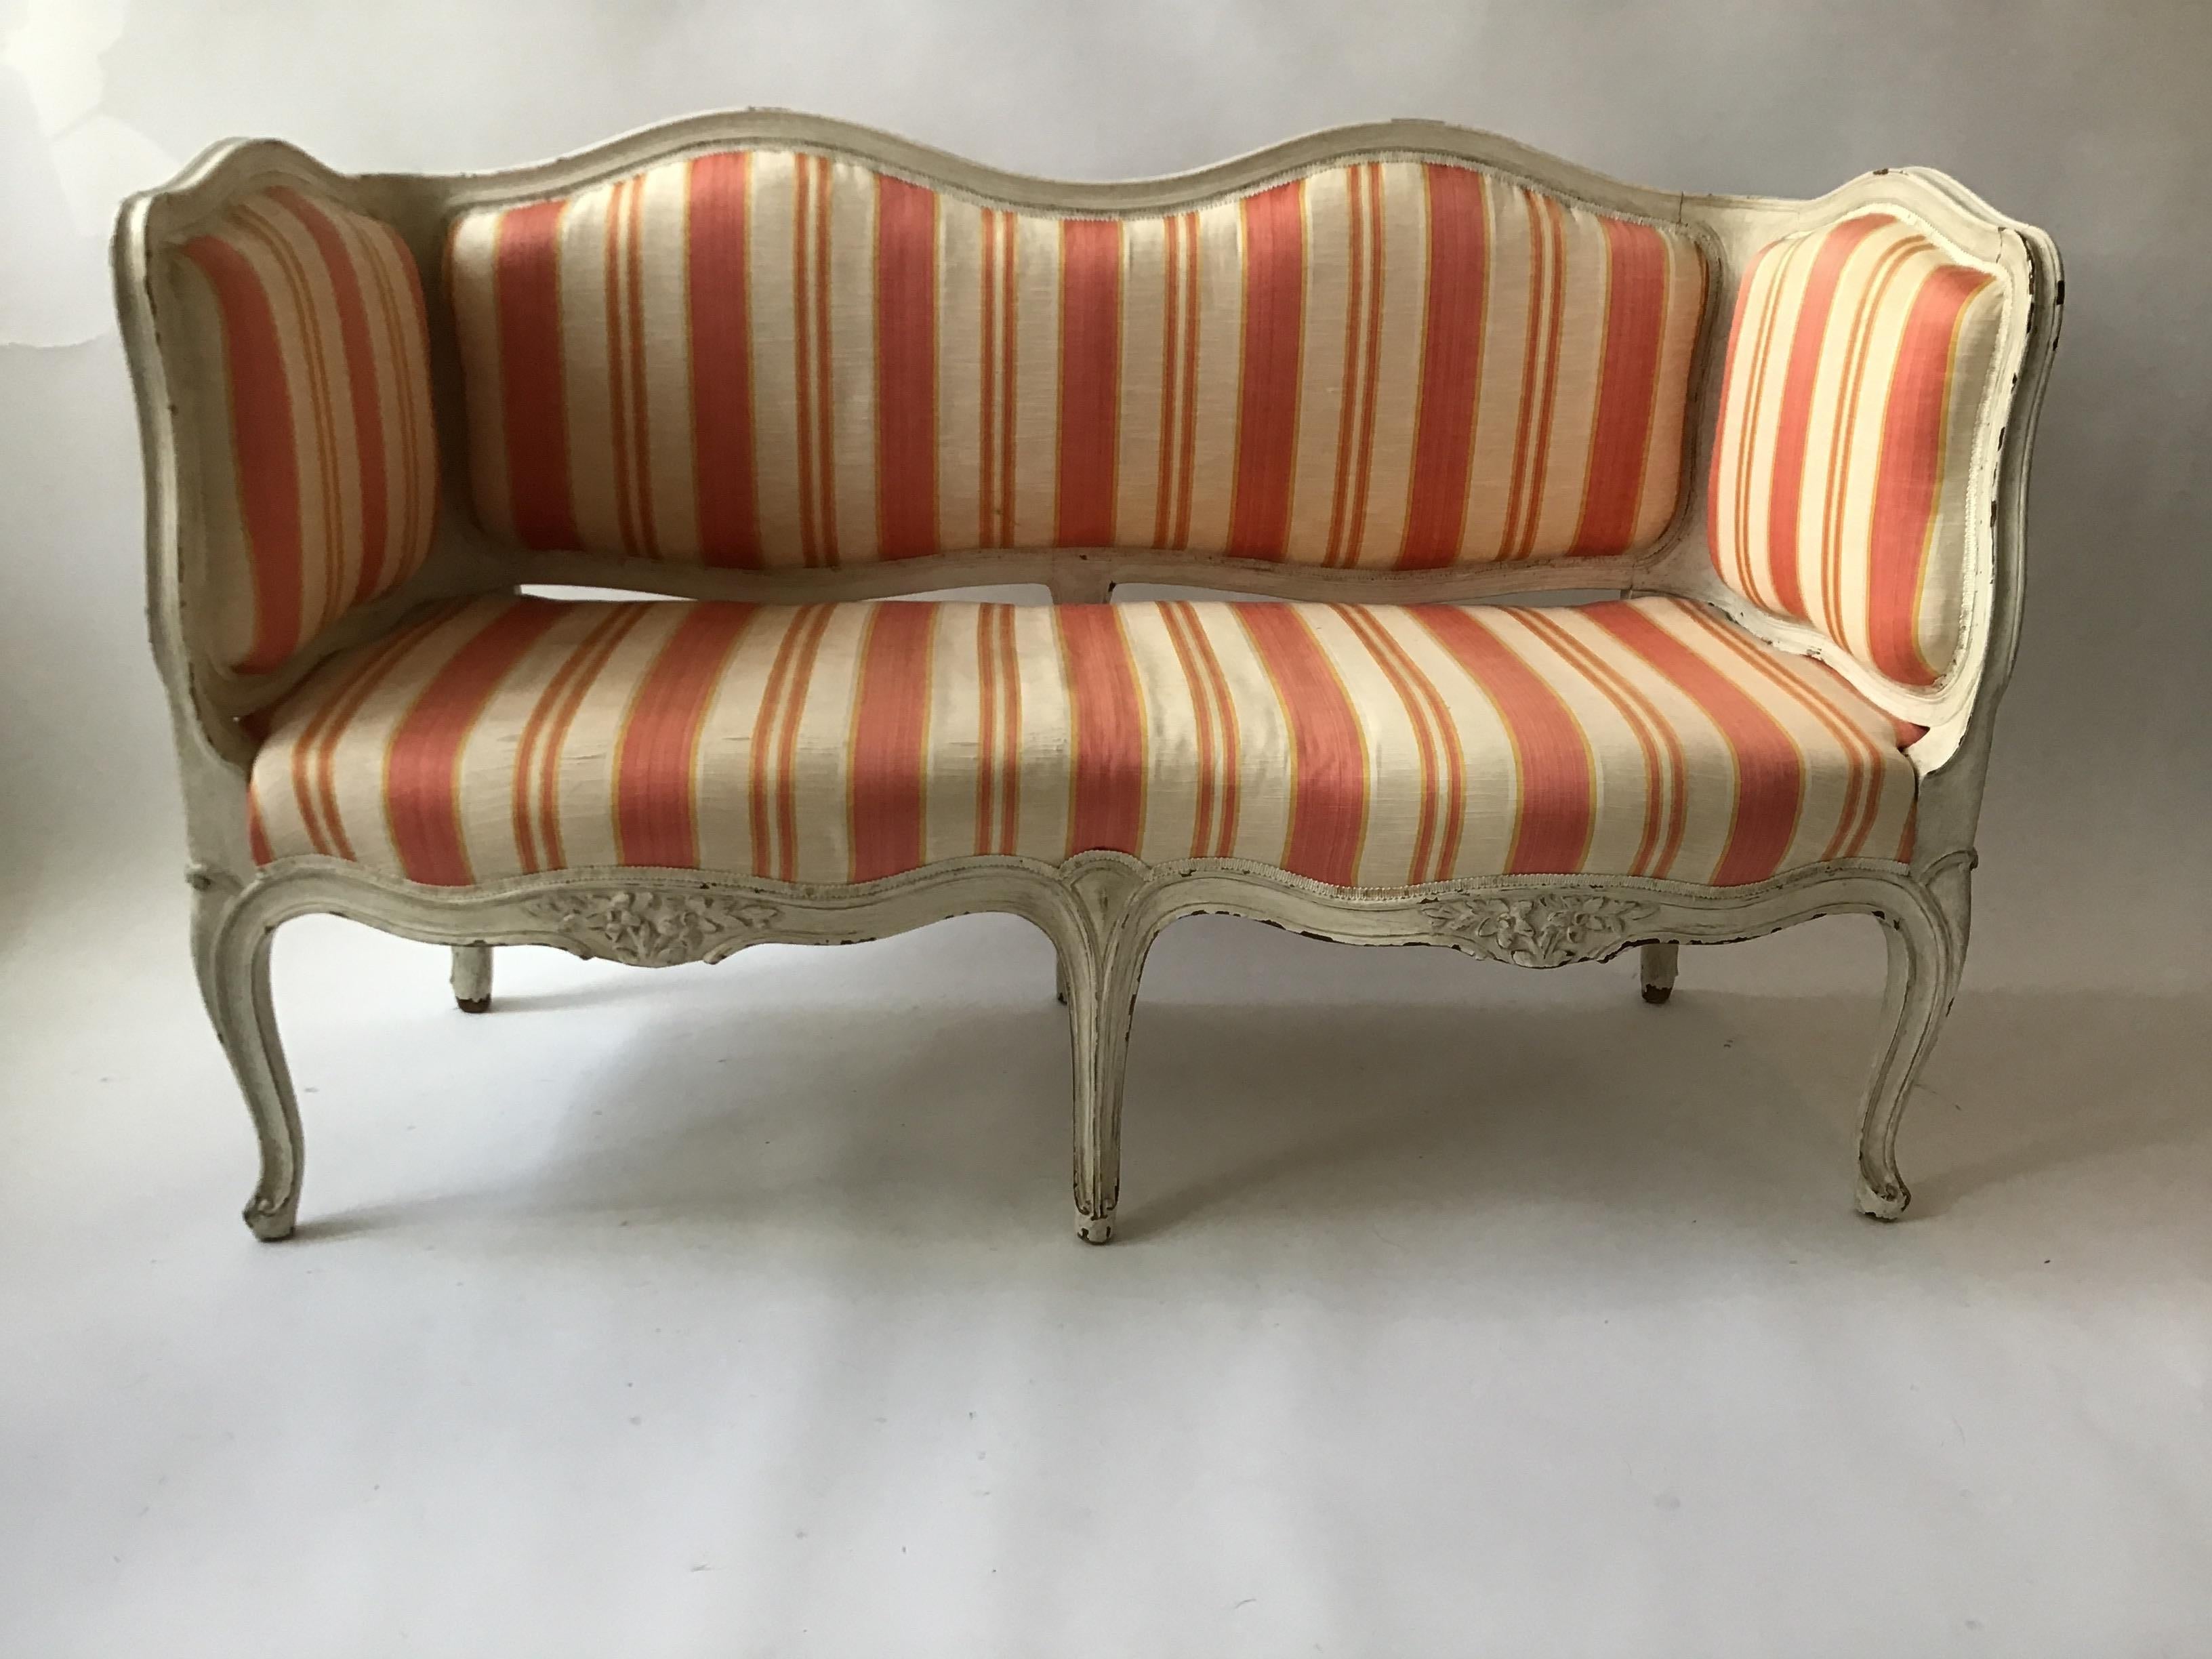 1960s French style Louis XV high sided bench / settee. From a Greenwhich, Connecticut estate.